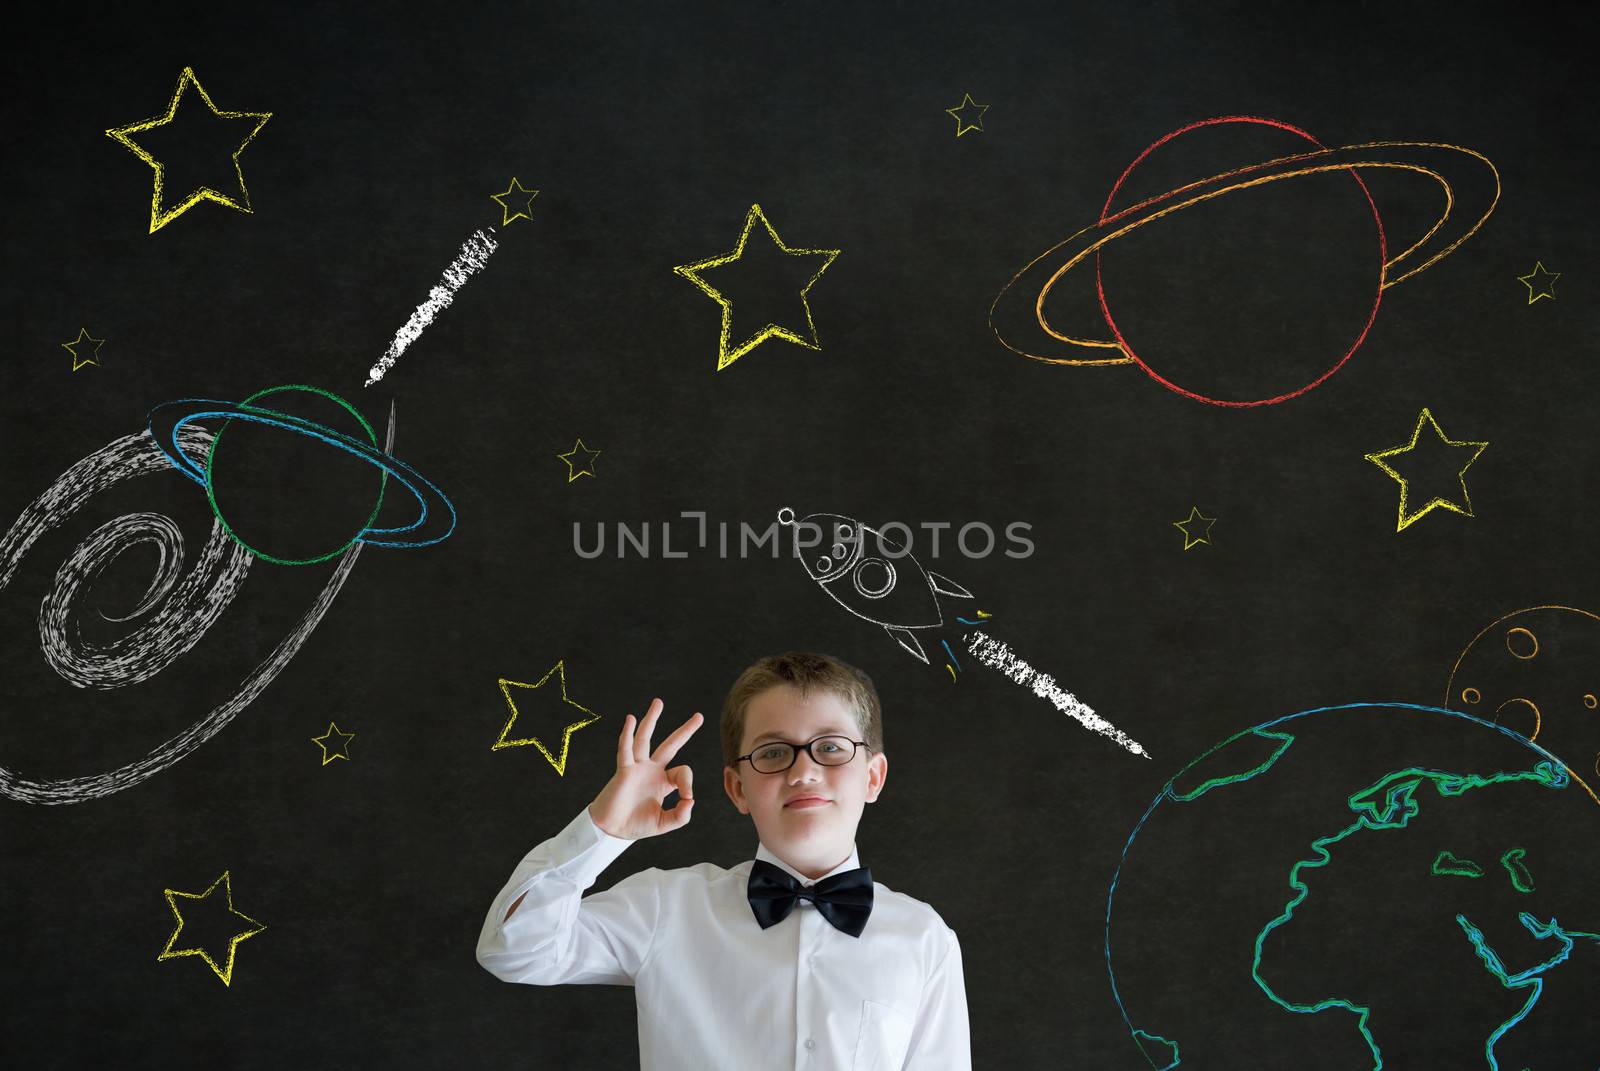 All ok or okay sign boy dressed up as business man with chalk universe planet solar system on blackboard imagining space travel